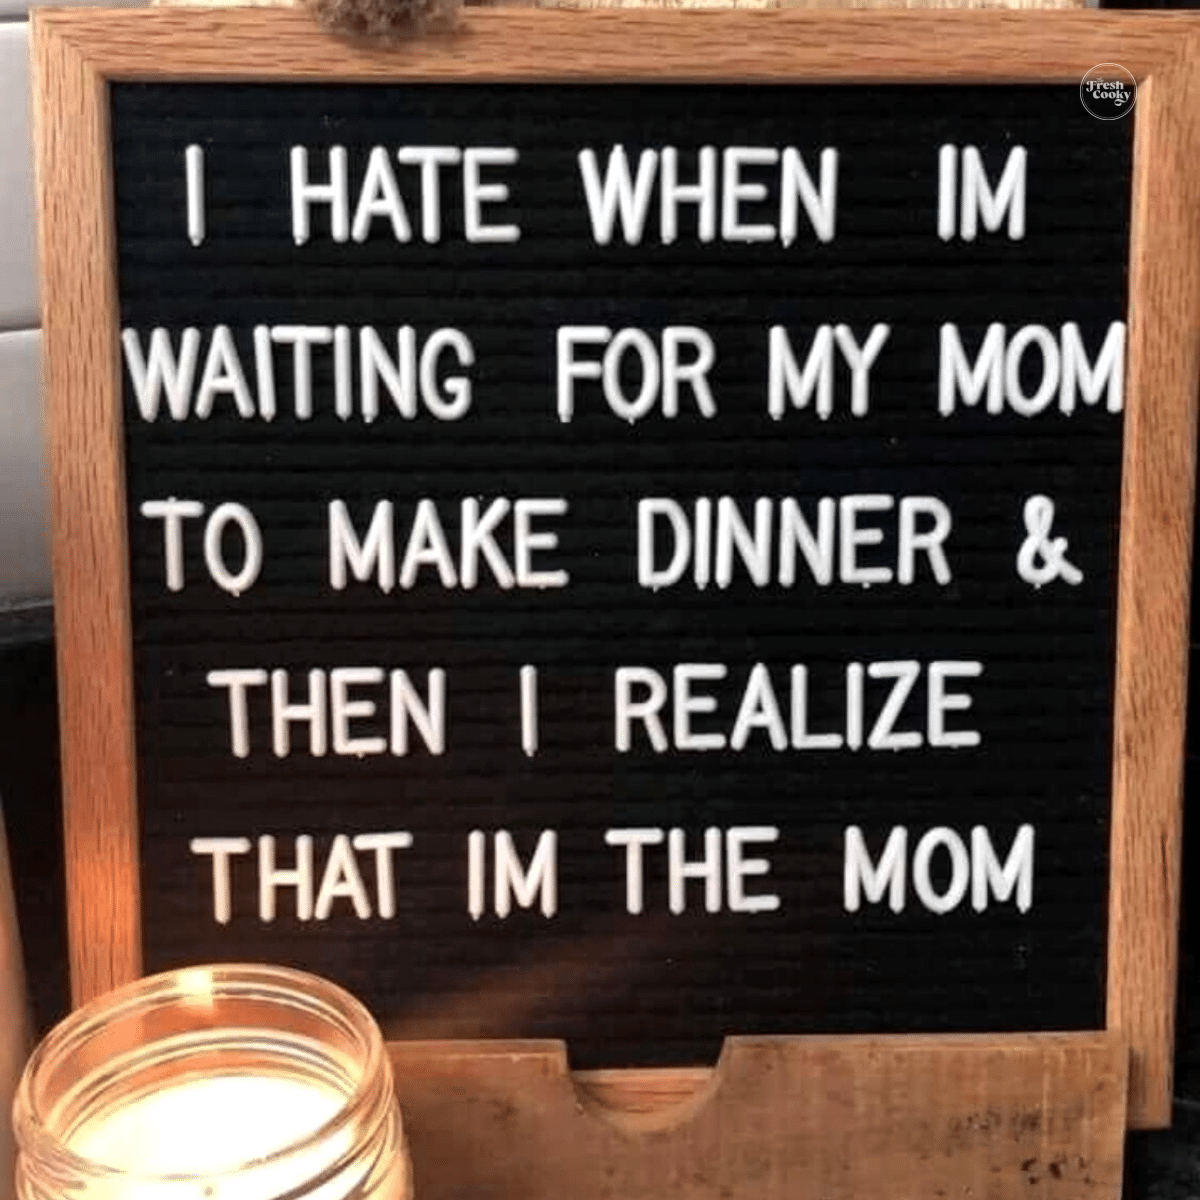 Message board with, "I hate when I'm waiting for my mom to make dinner and then I realize that I'm the mom.